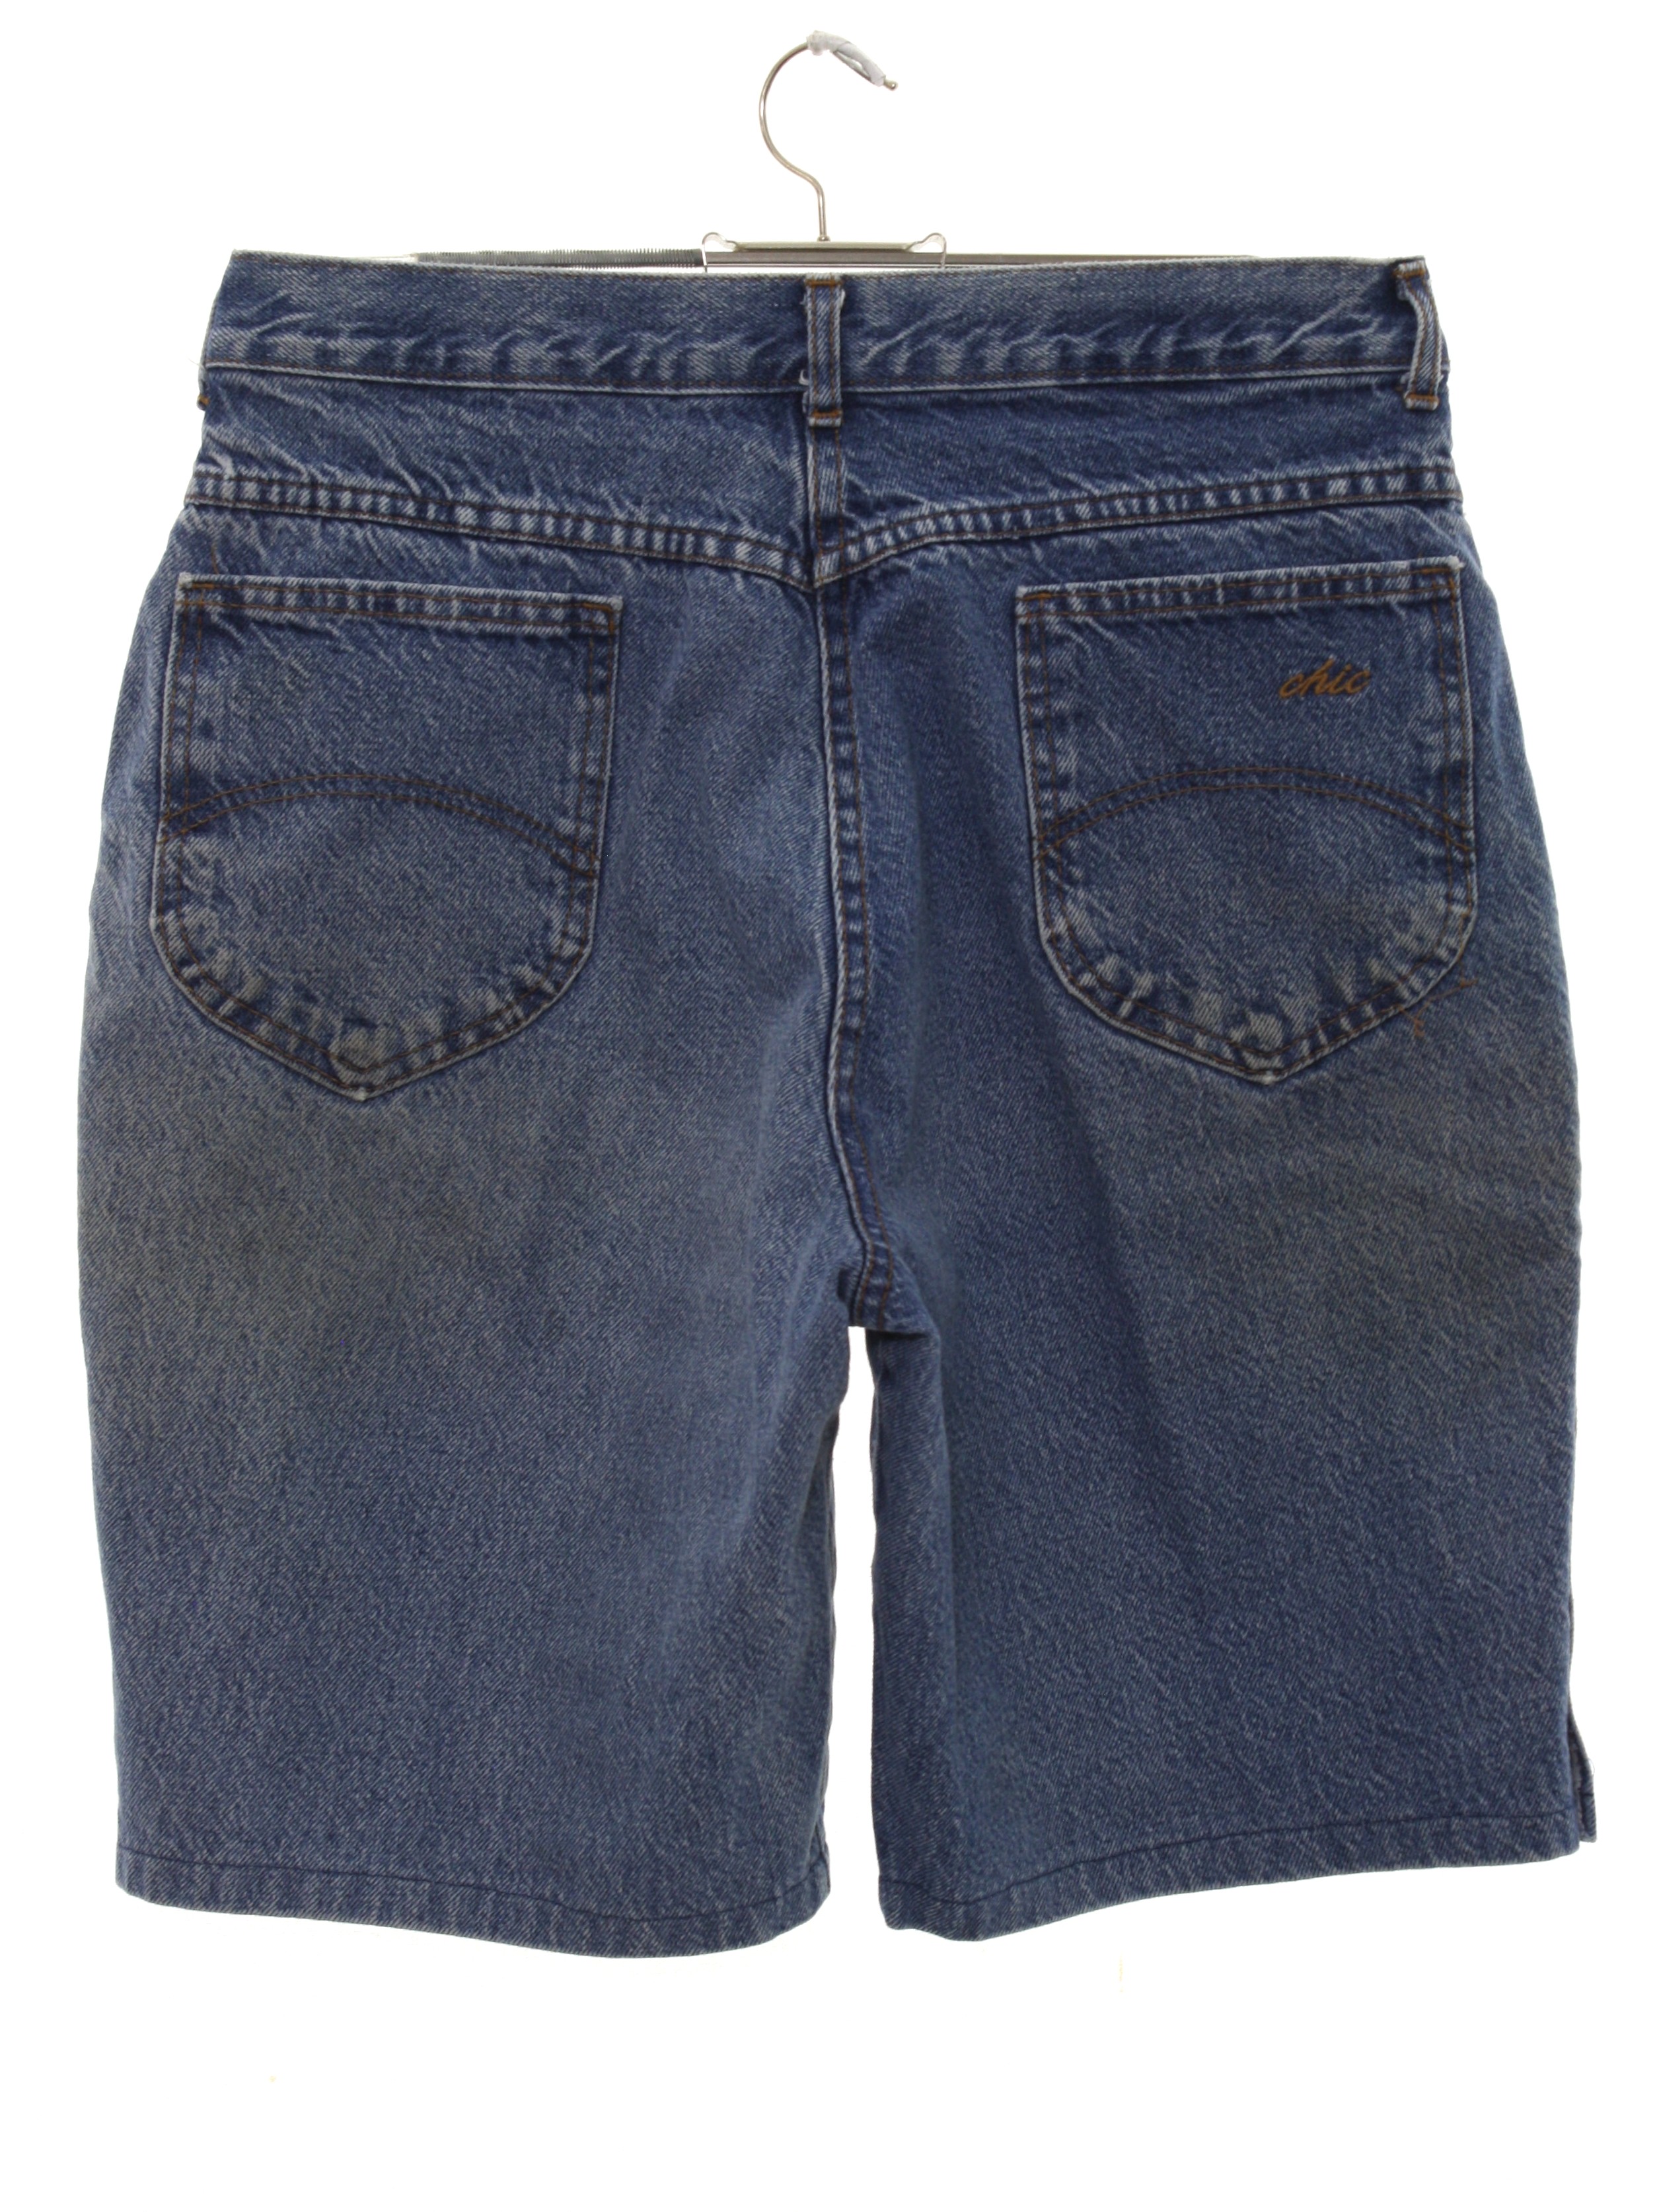 Eighties Chic Shorts: Late 80s -Chic- Womens stone washed blue ...